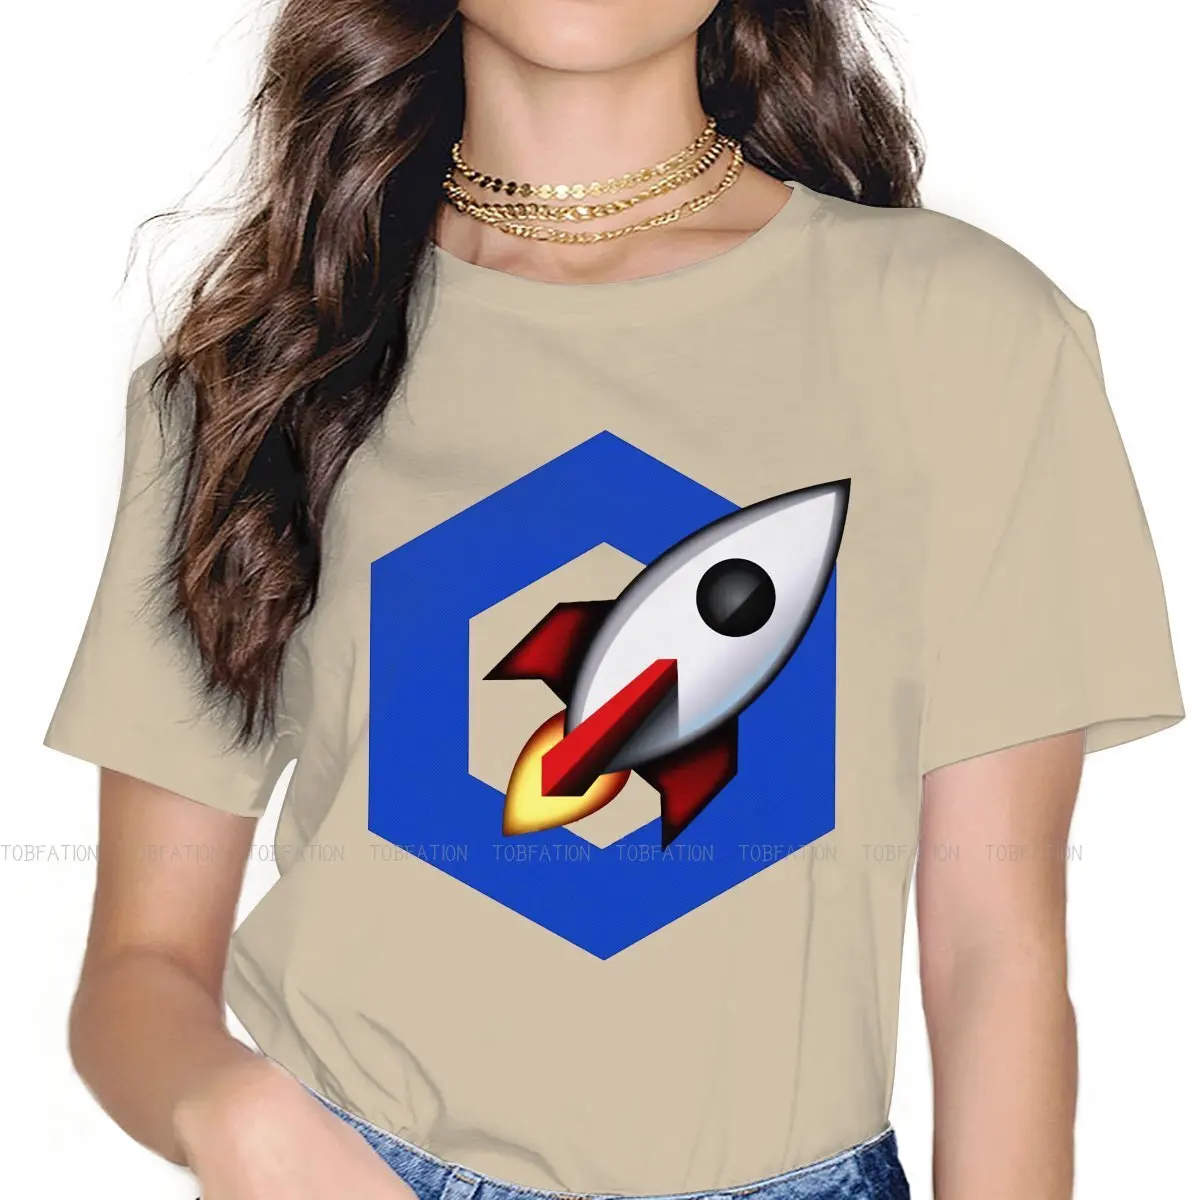 

Rocket 5XL TShirt ChainLink Crypto Link Coin Crytopcurrency Blockchain Printing Casual T Shirt Female Short Sleeve Special Gift